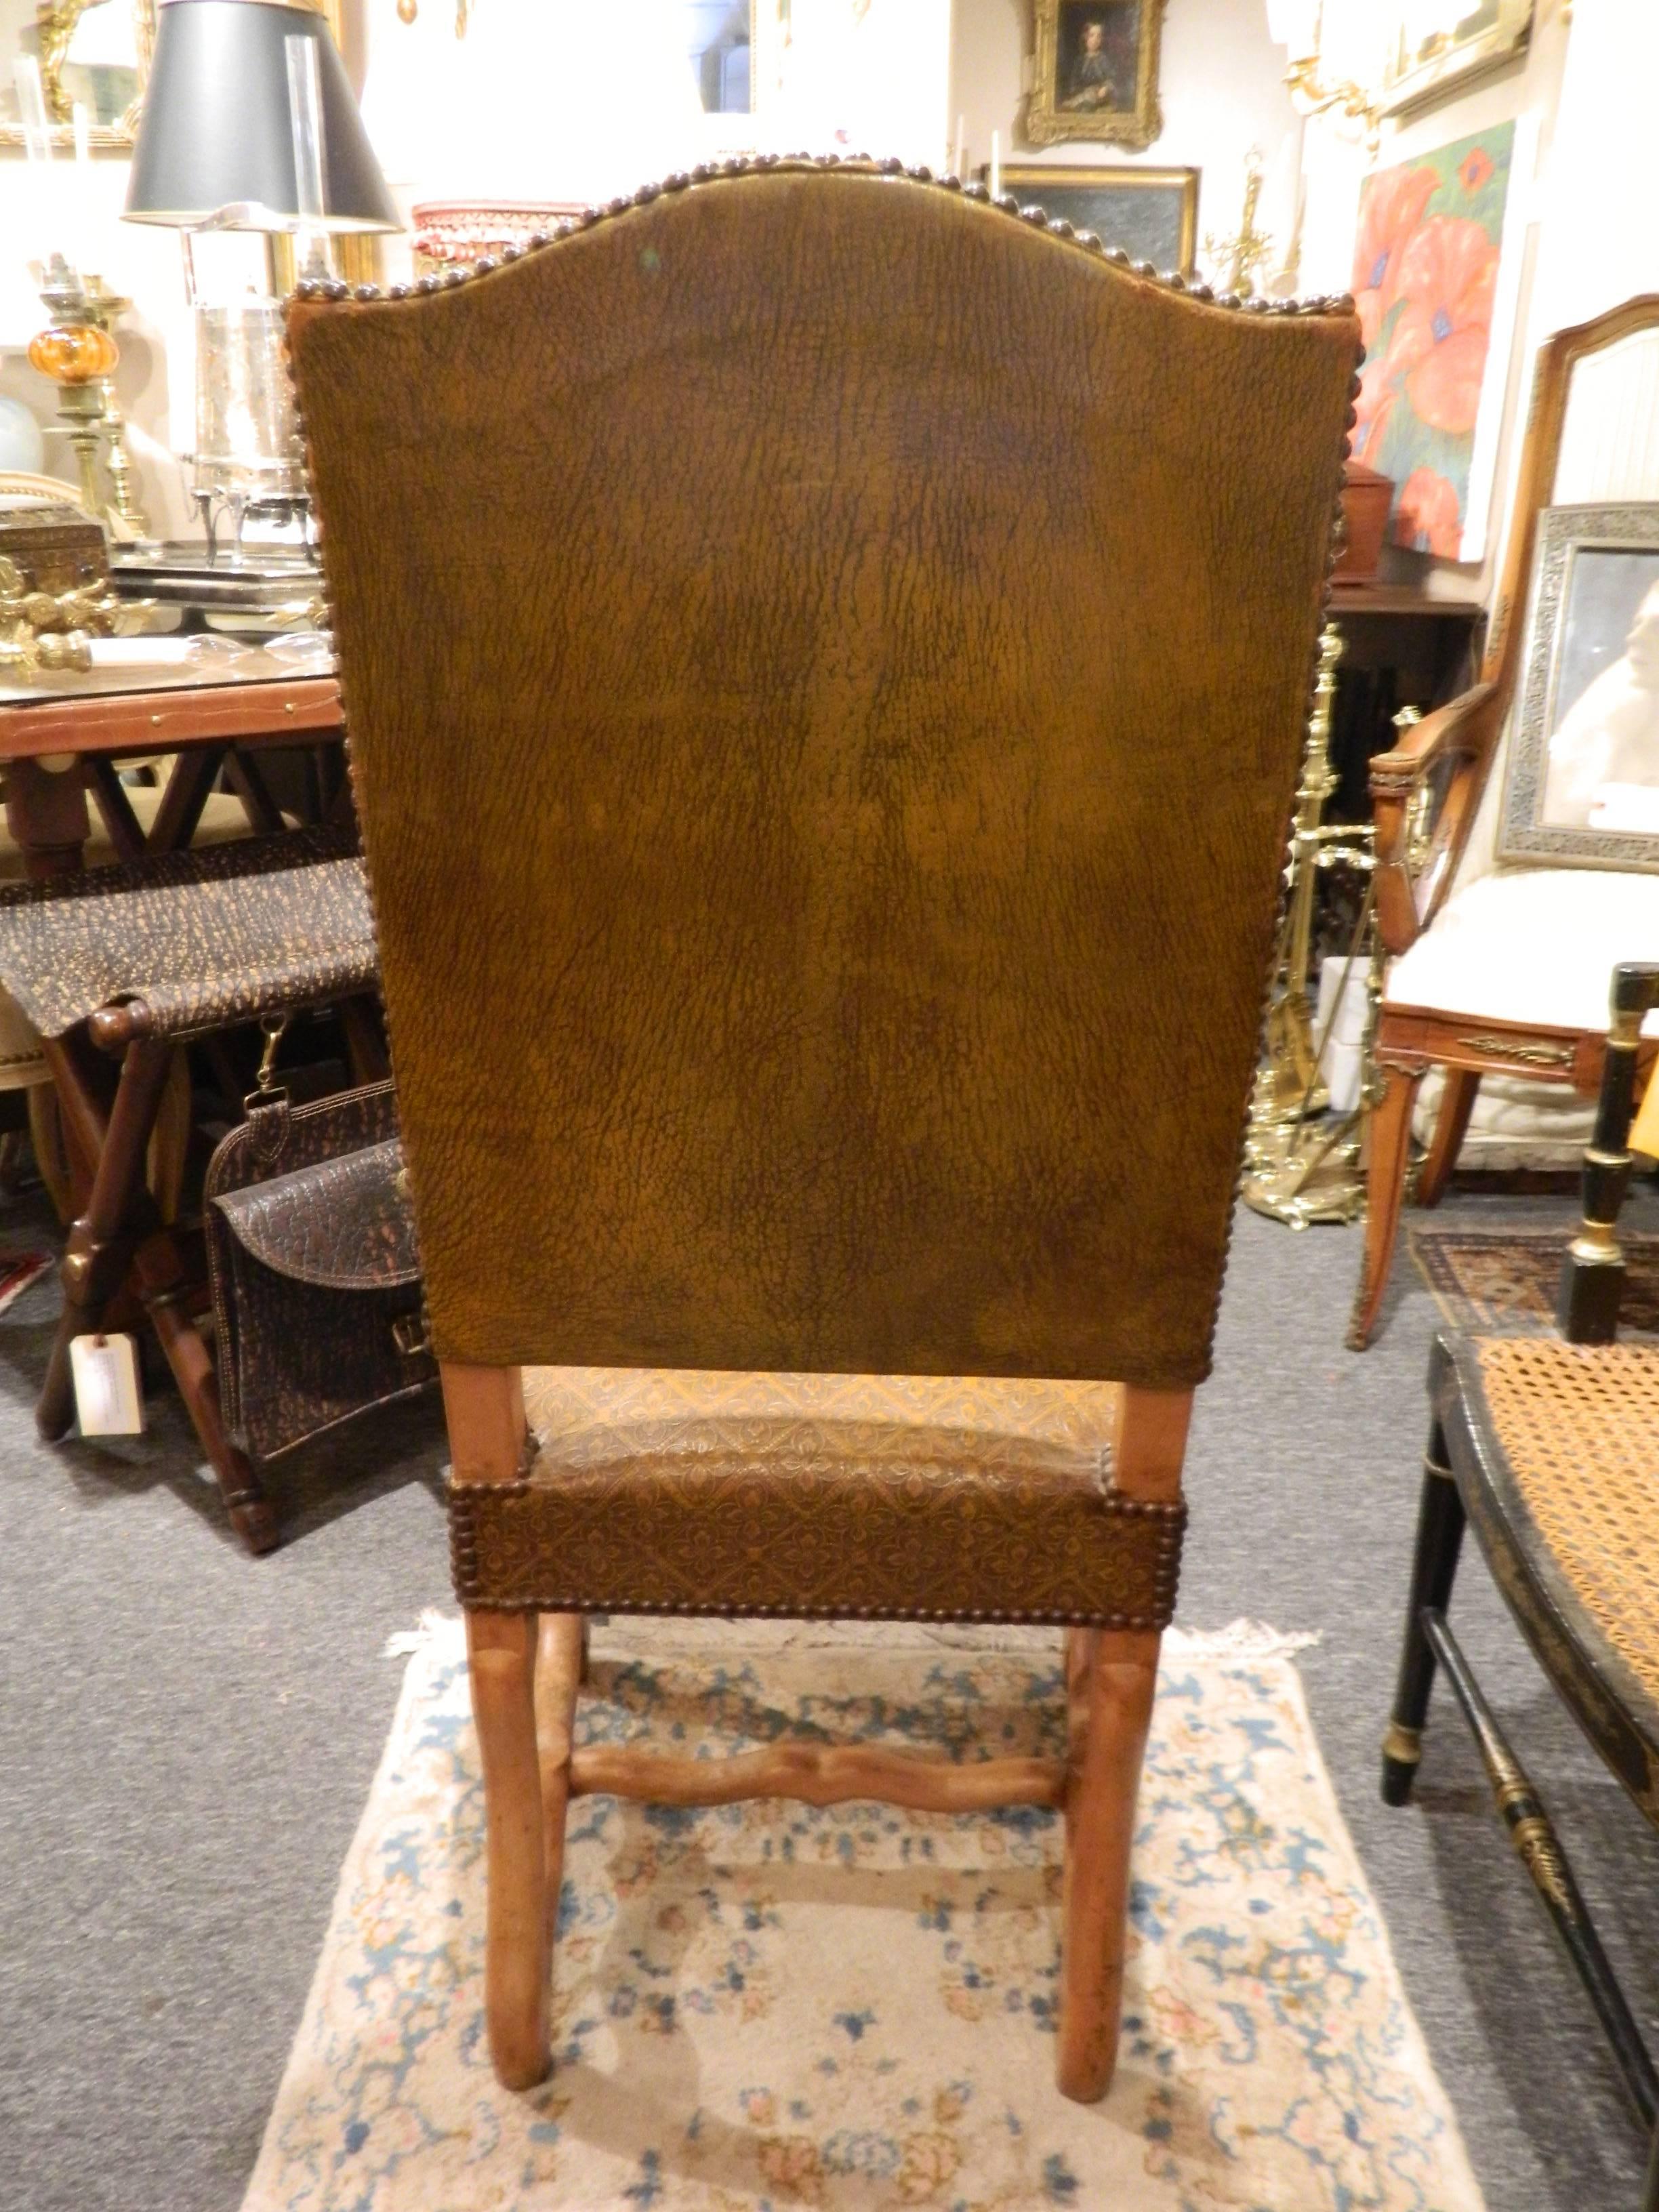 Pair of French side chairs upholstered in embossed leather with nailhead treatment, late 19th century.
  